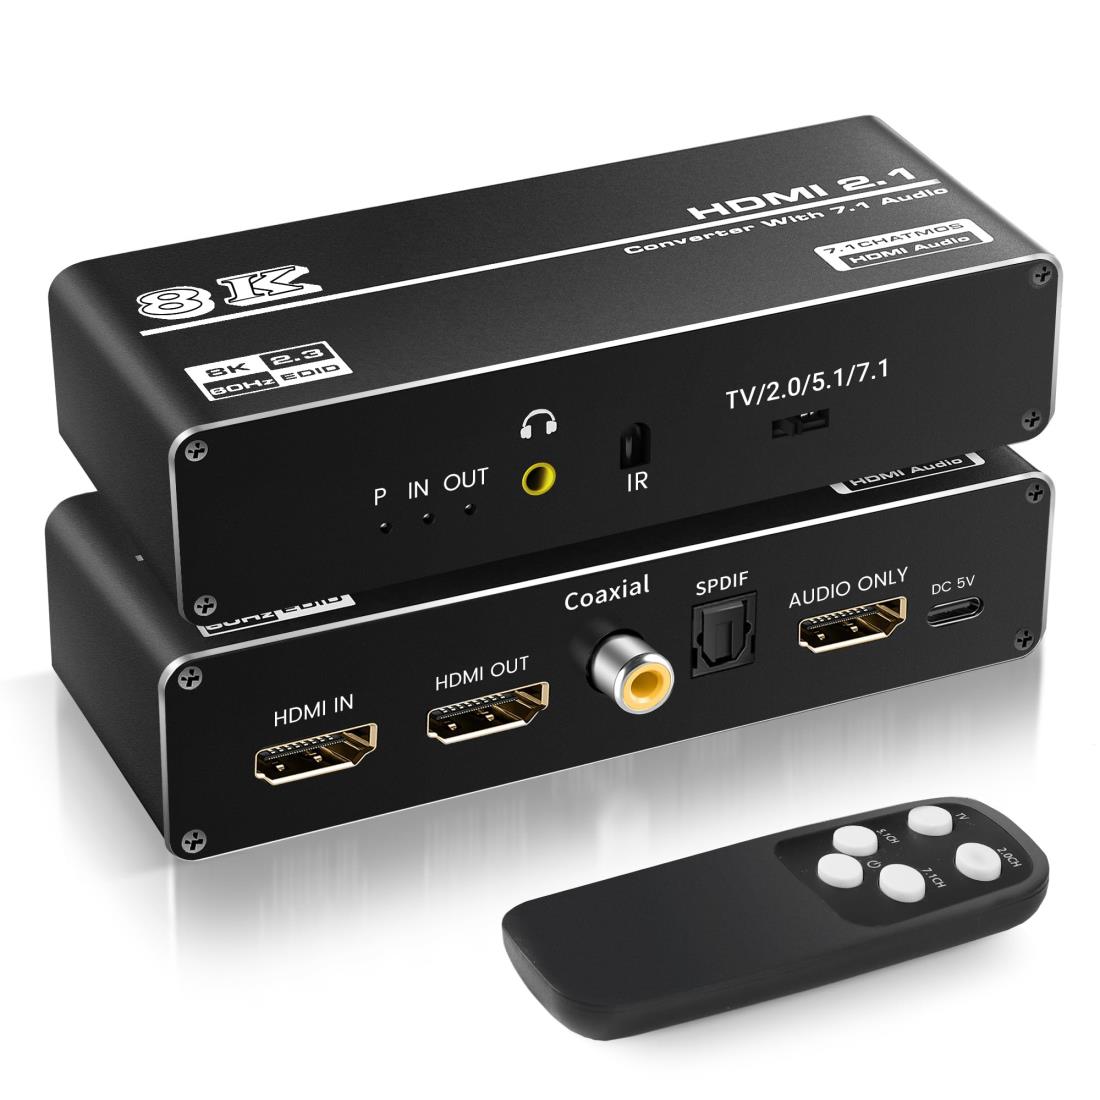 avedio links 8K HDMI Audio Separator, 4K 120Hz Audio Separator, Connect to 7.1ch Surround System, Sound Separation Function, 7.1ch HDMI Audio Optical Digital SPDIF Coaxial 3.5mm Audio Separator,